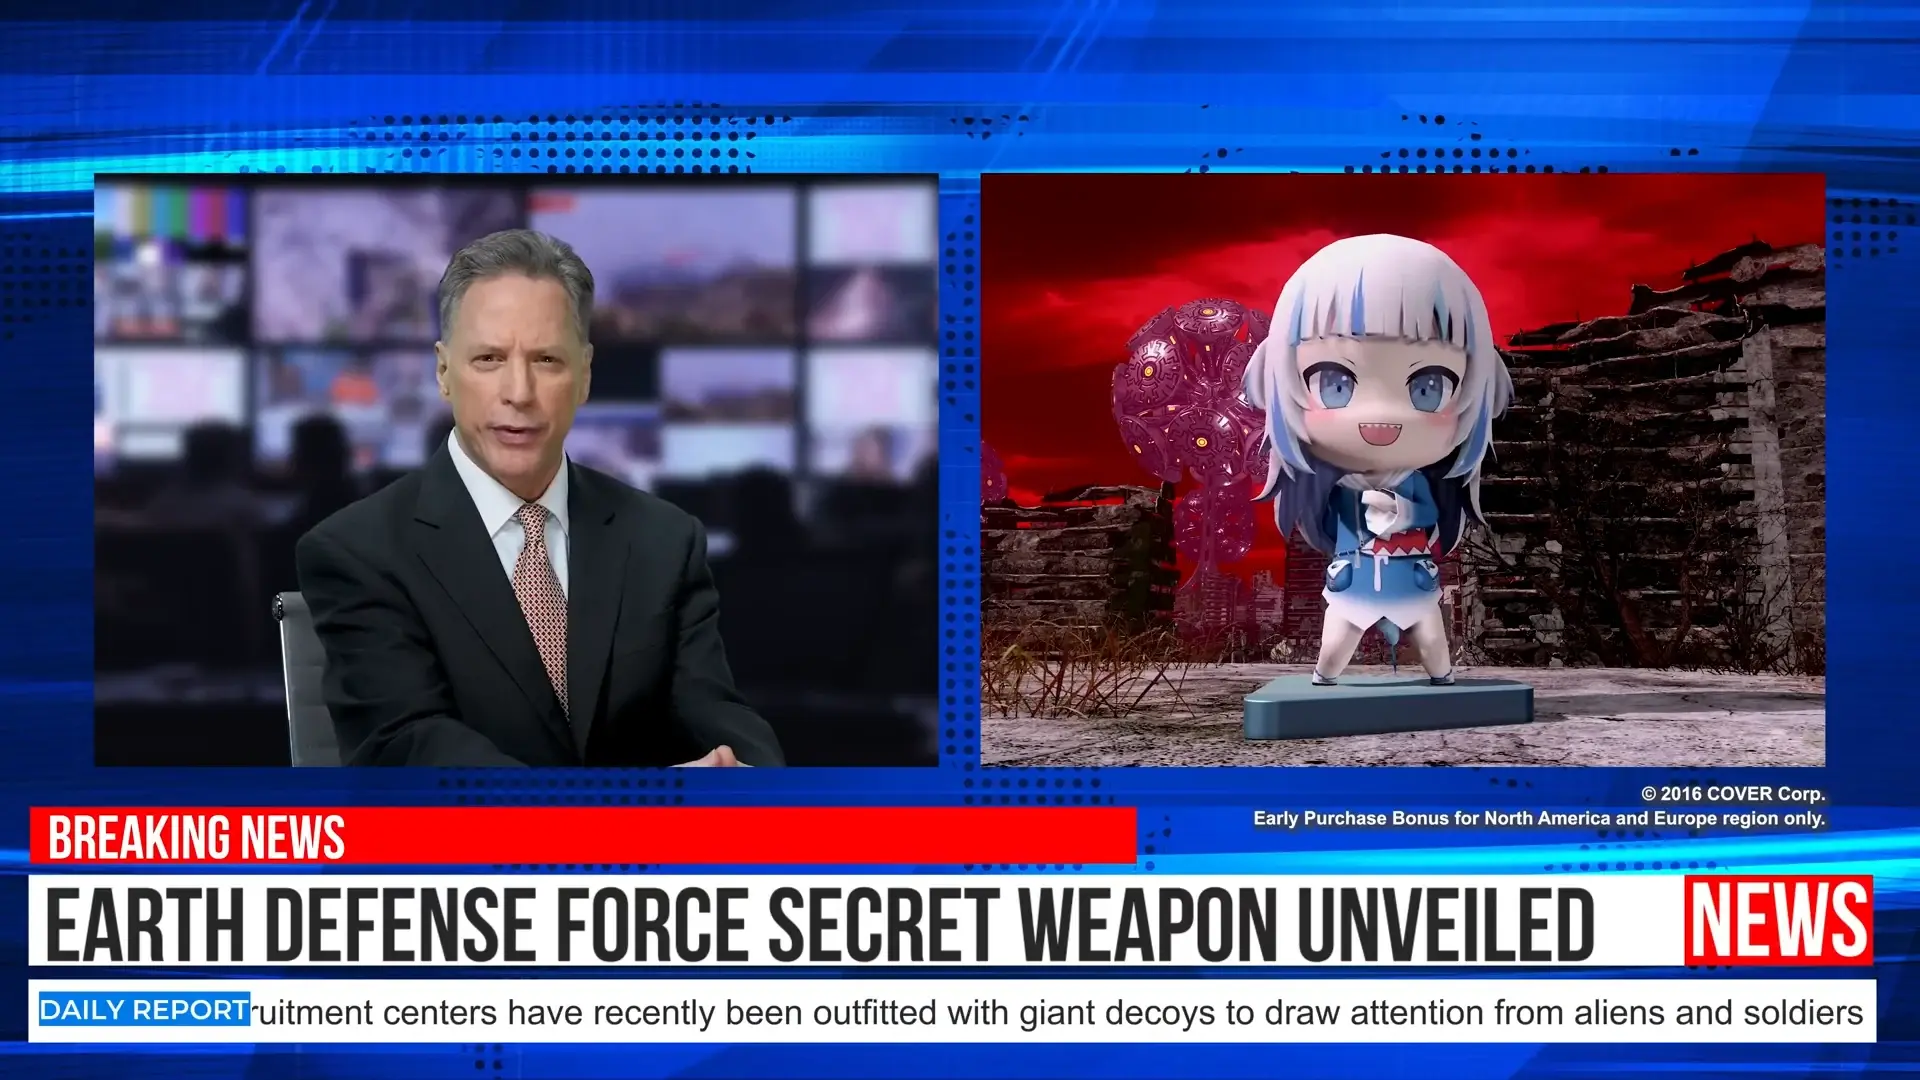 A promotional "news" segment for the game Earth Defense Force 6, showing a newscaster discussing Hololive members with Gawr Gura visible on the screen.